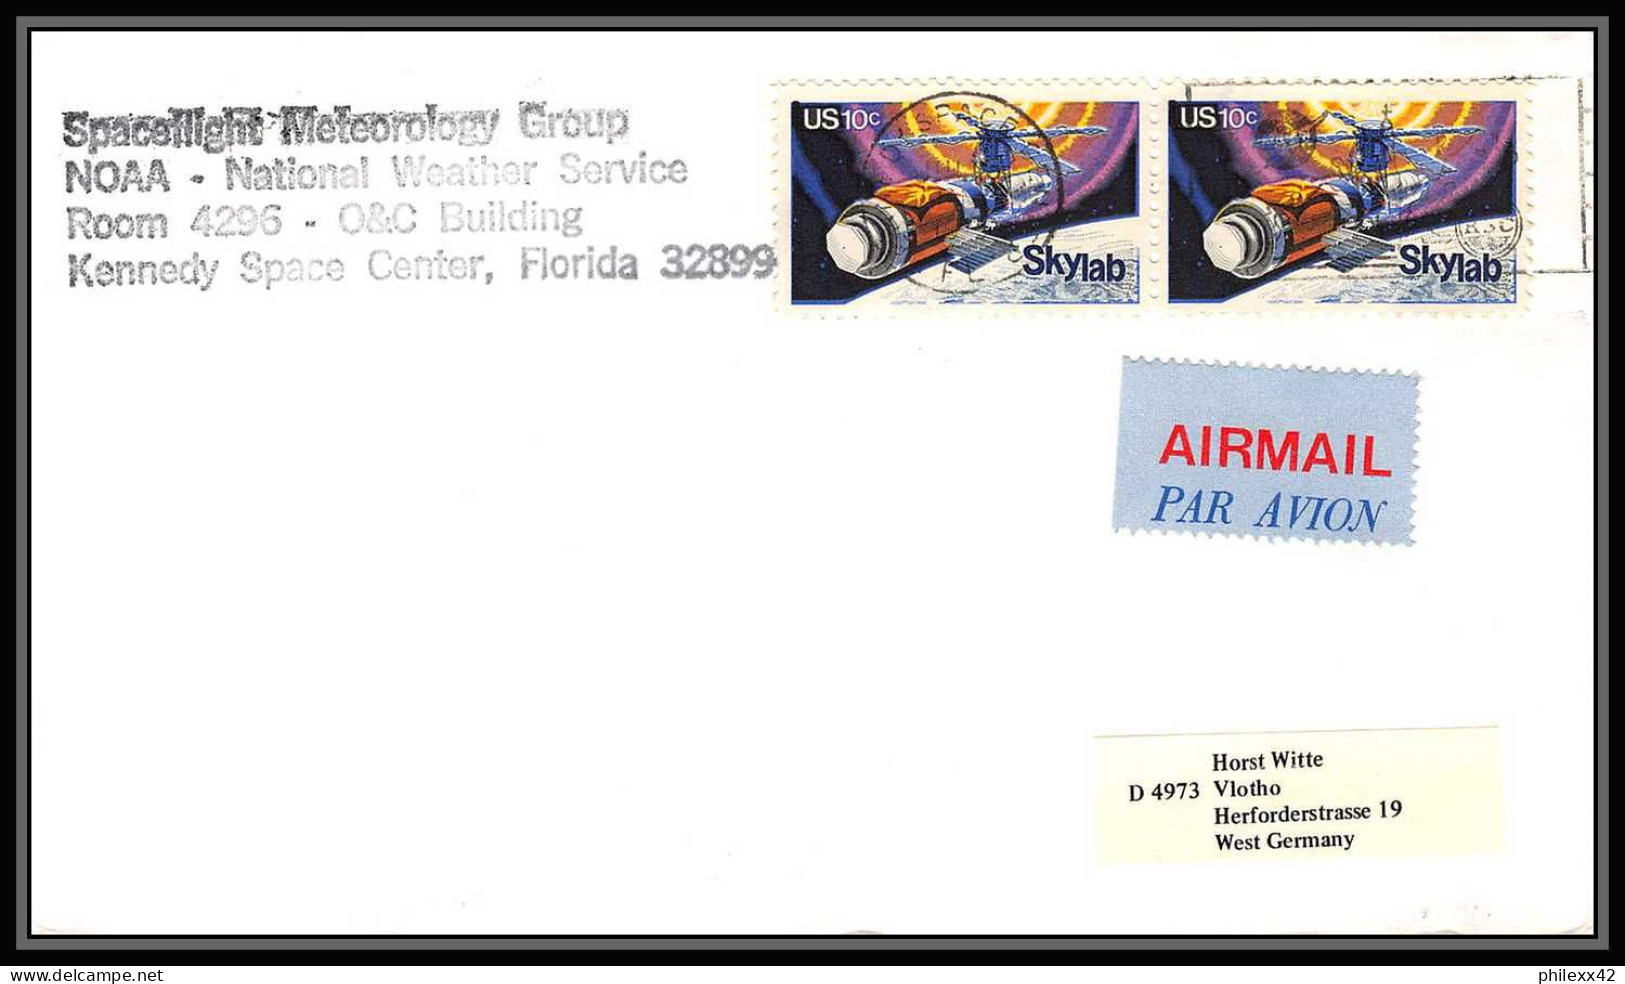 0002/ Espace (space Raumfahrt) Lettre (cover Briefe) USA Skylab 24/7/1975 KENNEDY SPACE CENTER Apollo Soyuz Test Project - United States